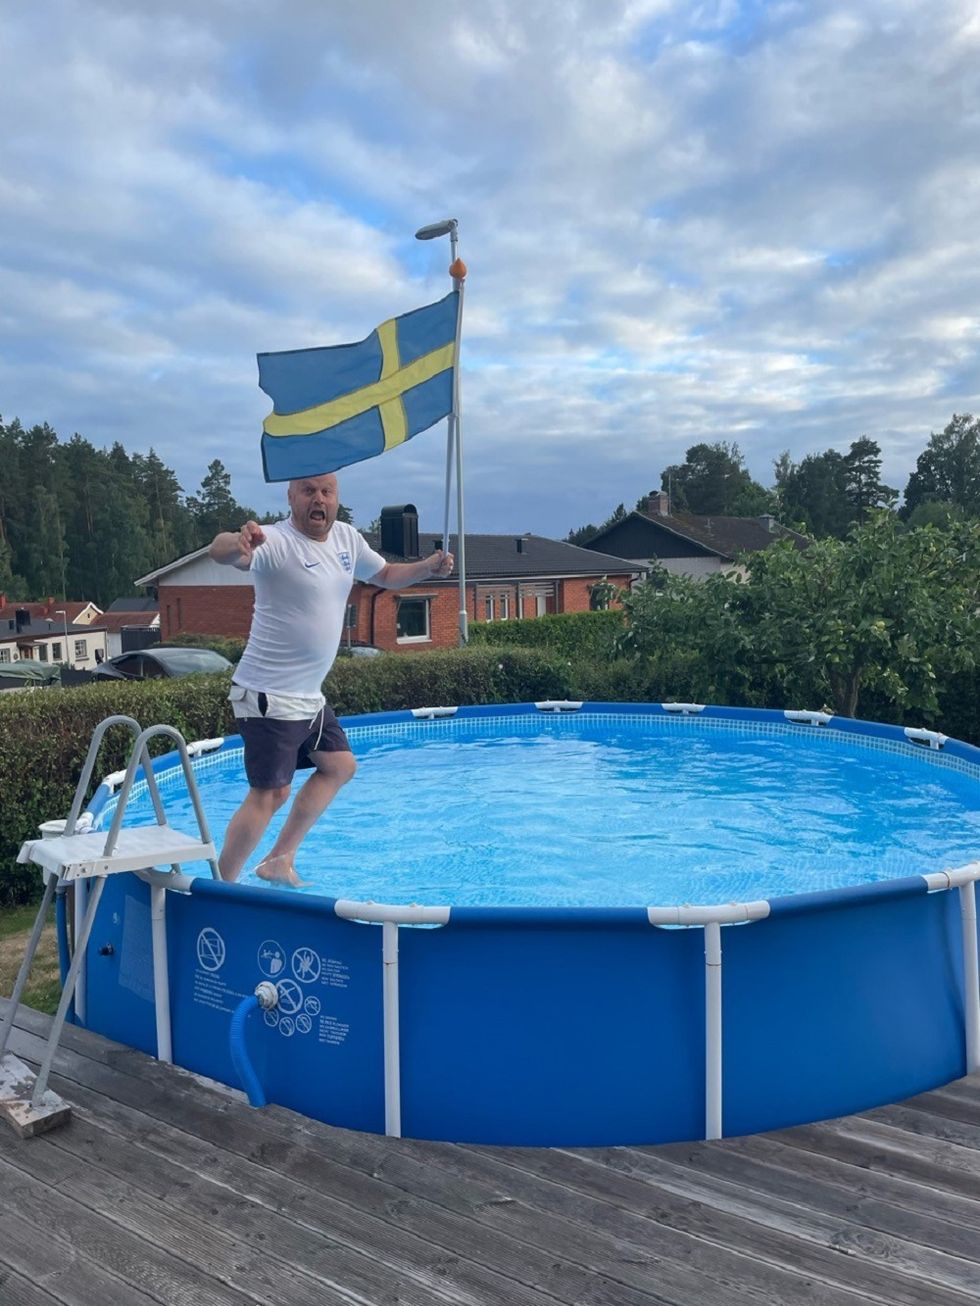 British man takes a dip to celebrate Lionesses’ win as Swedish family watch on